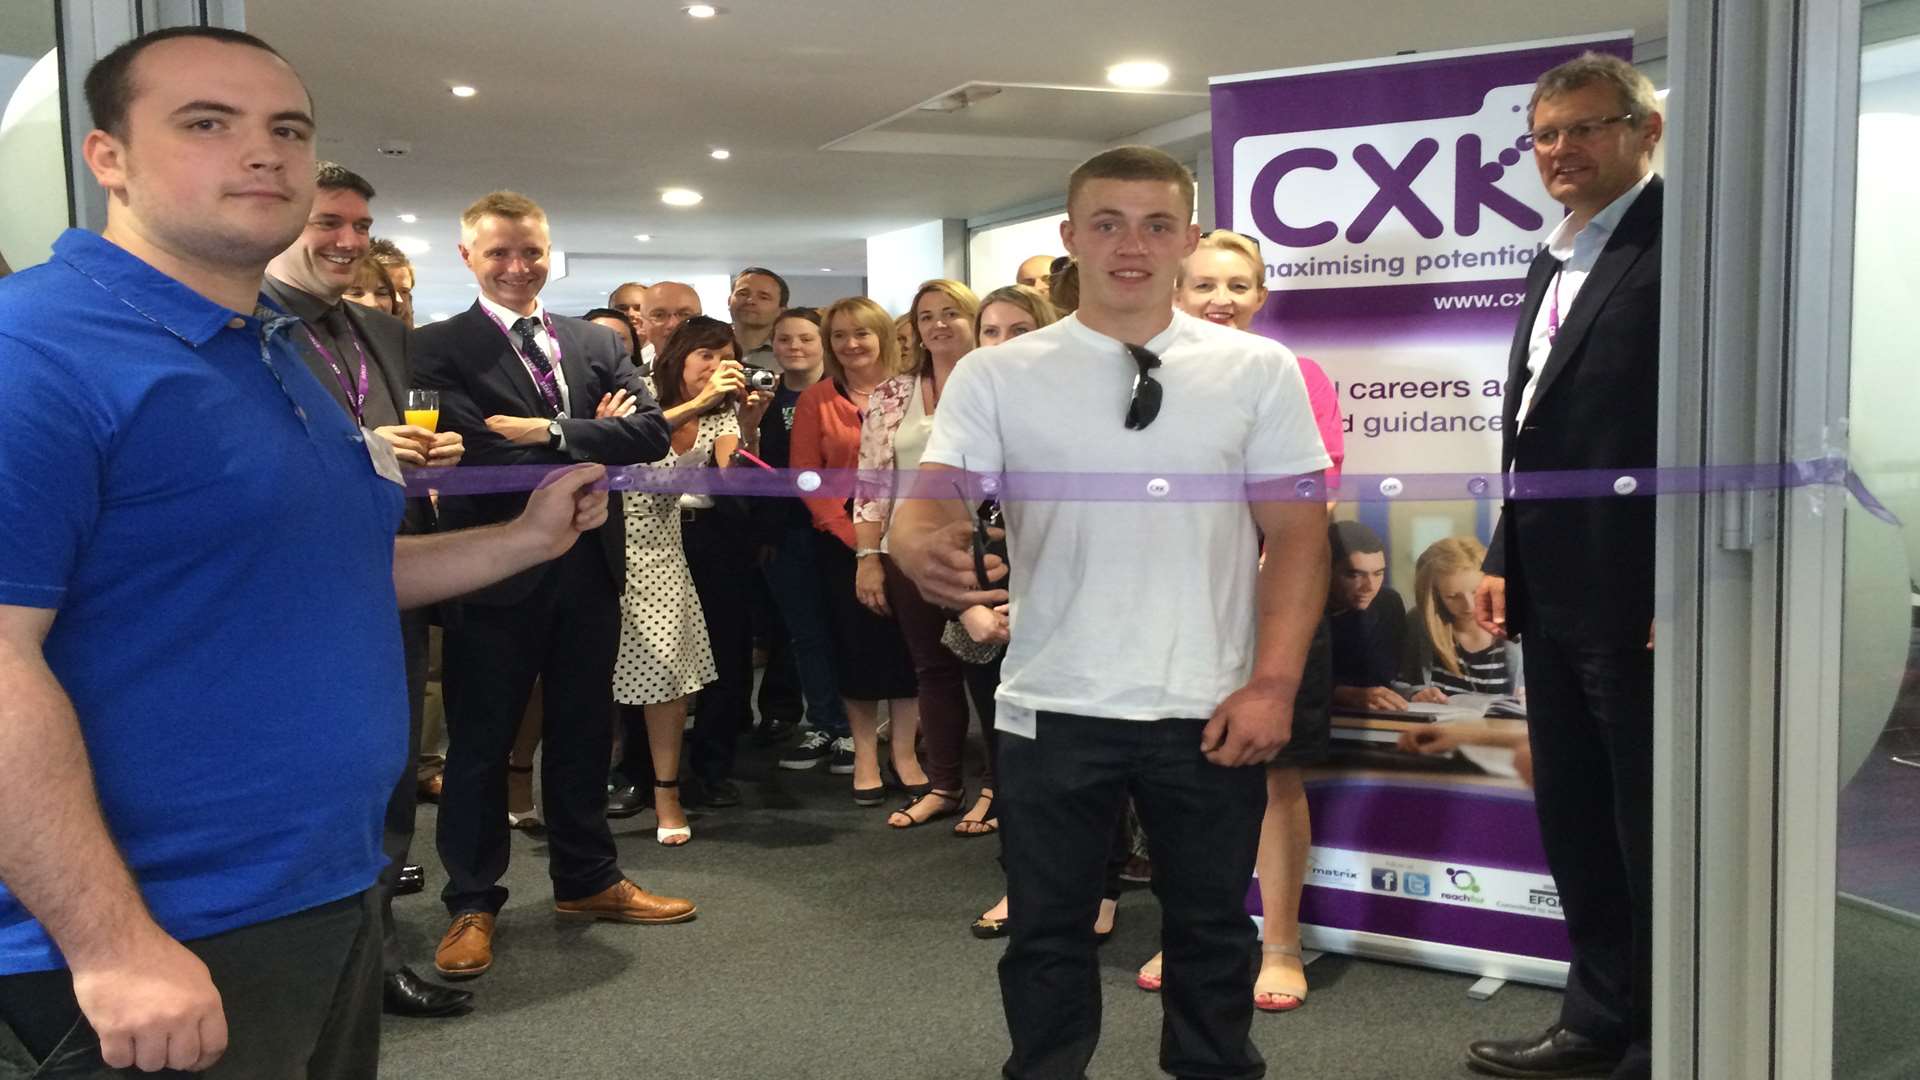 CXK opens its new head office in the Old Court in Ashford in 2014